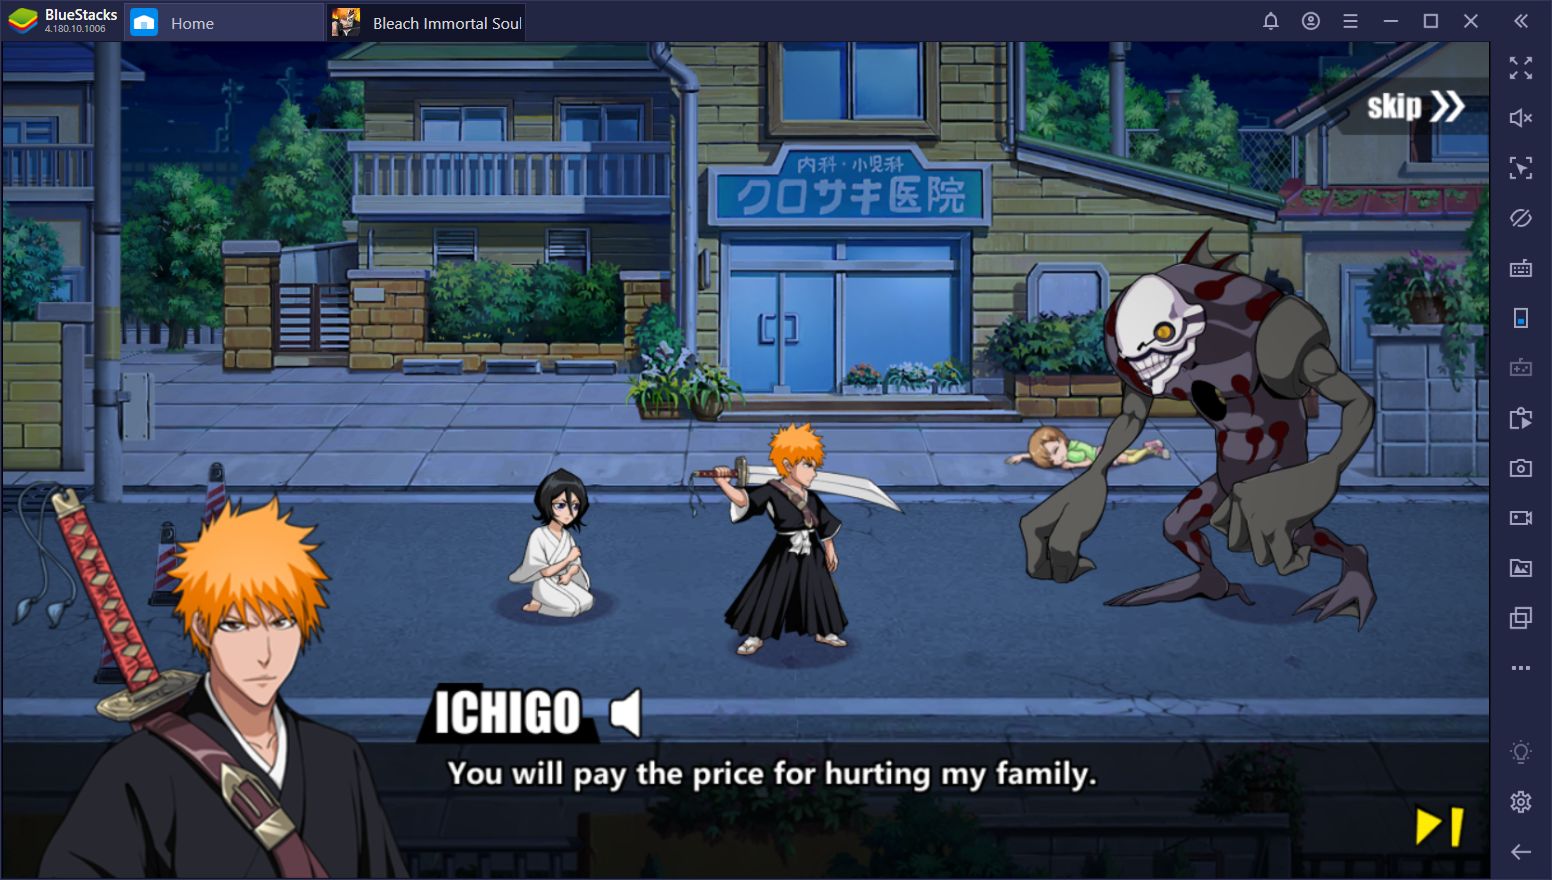 Beginner’s Guide for Bleach: Immortal Soul - All the Starter Tips You Need to Know